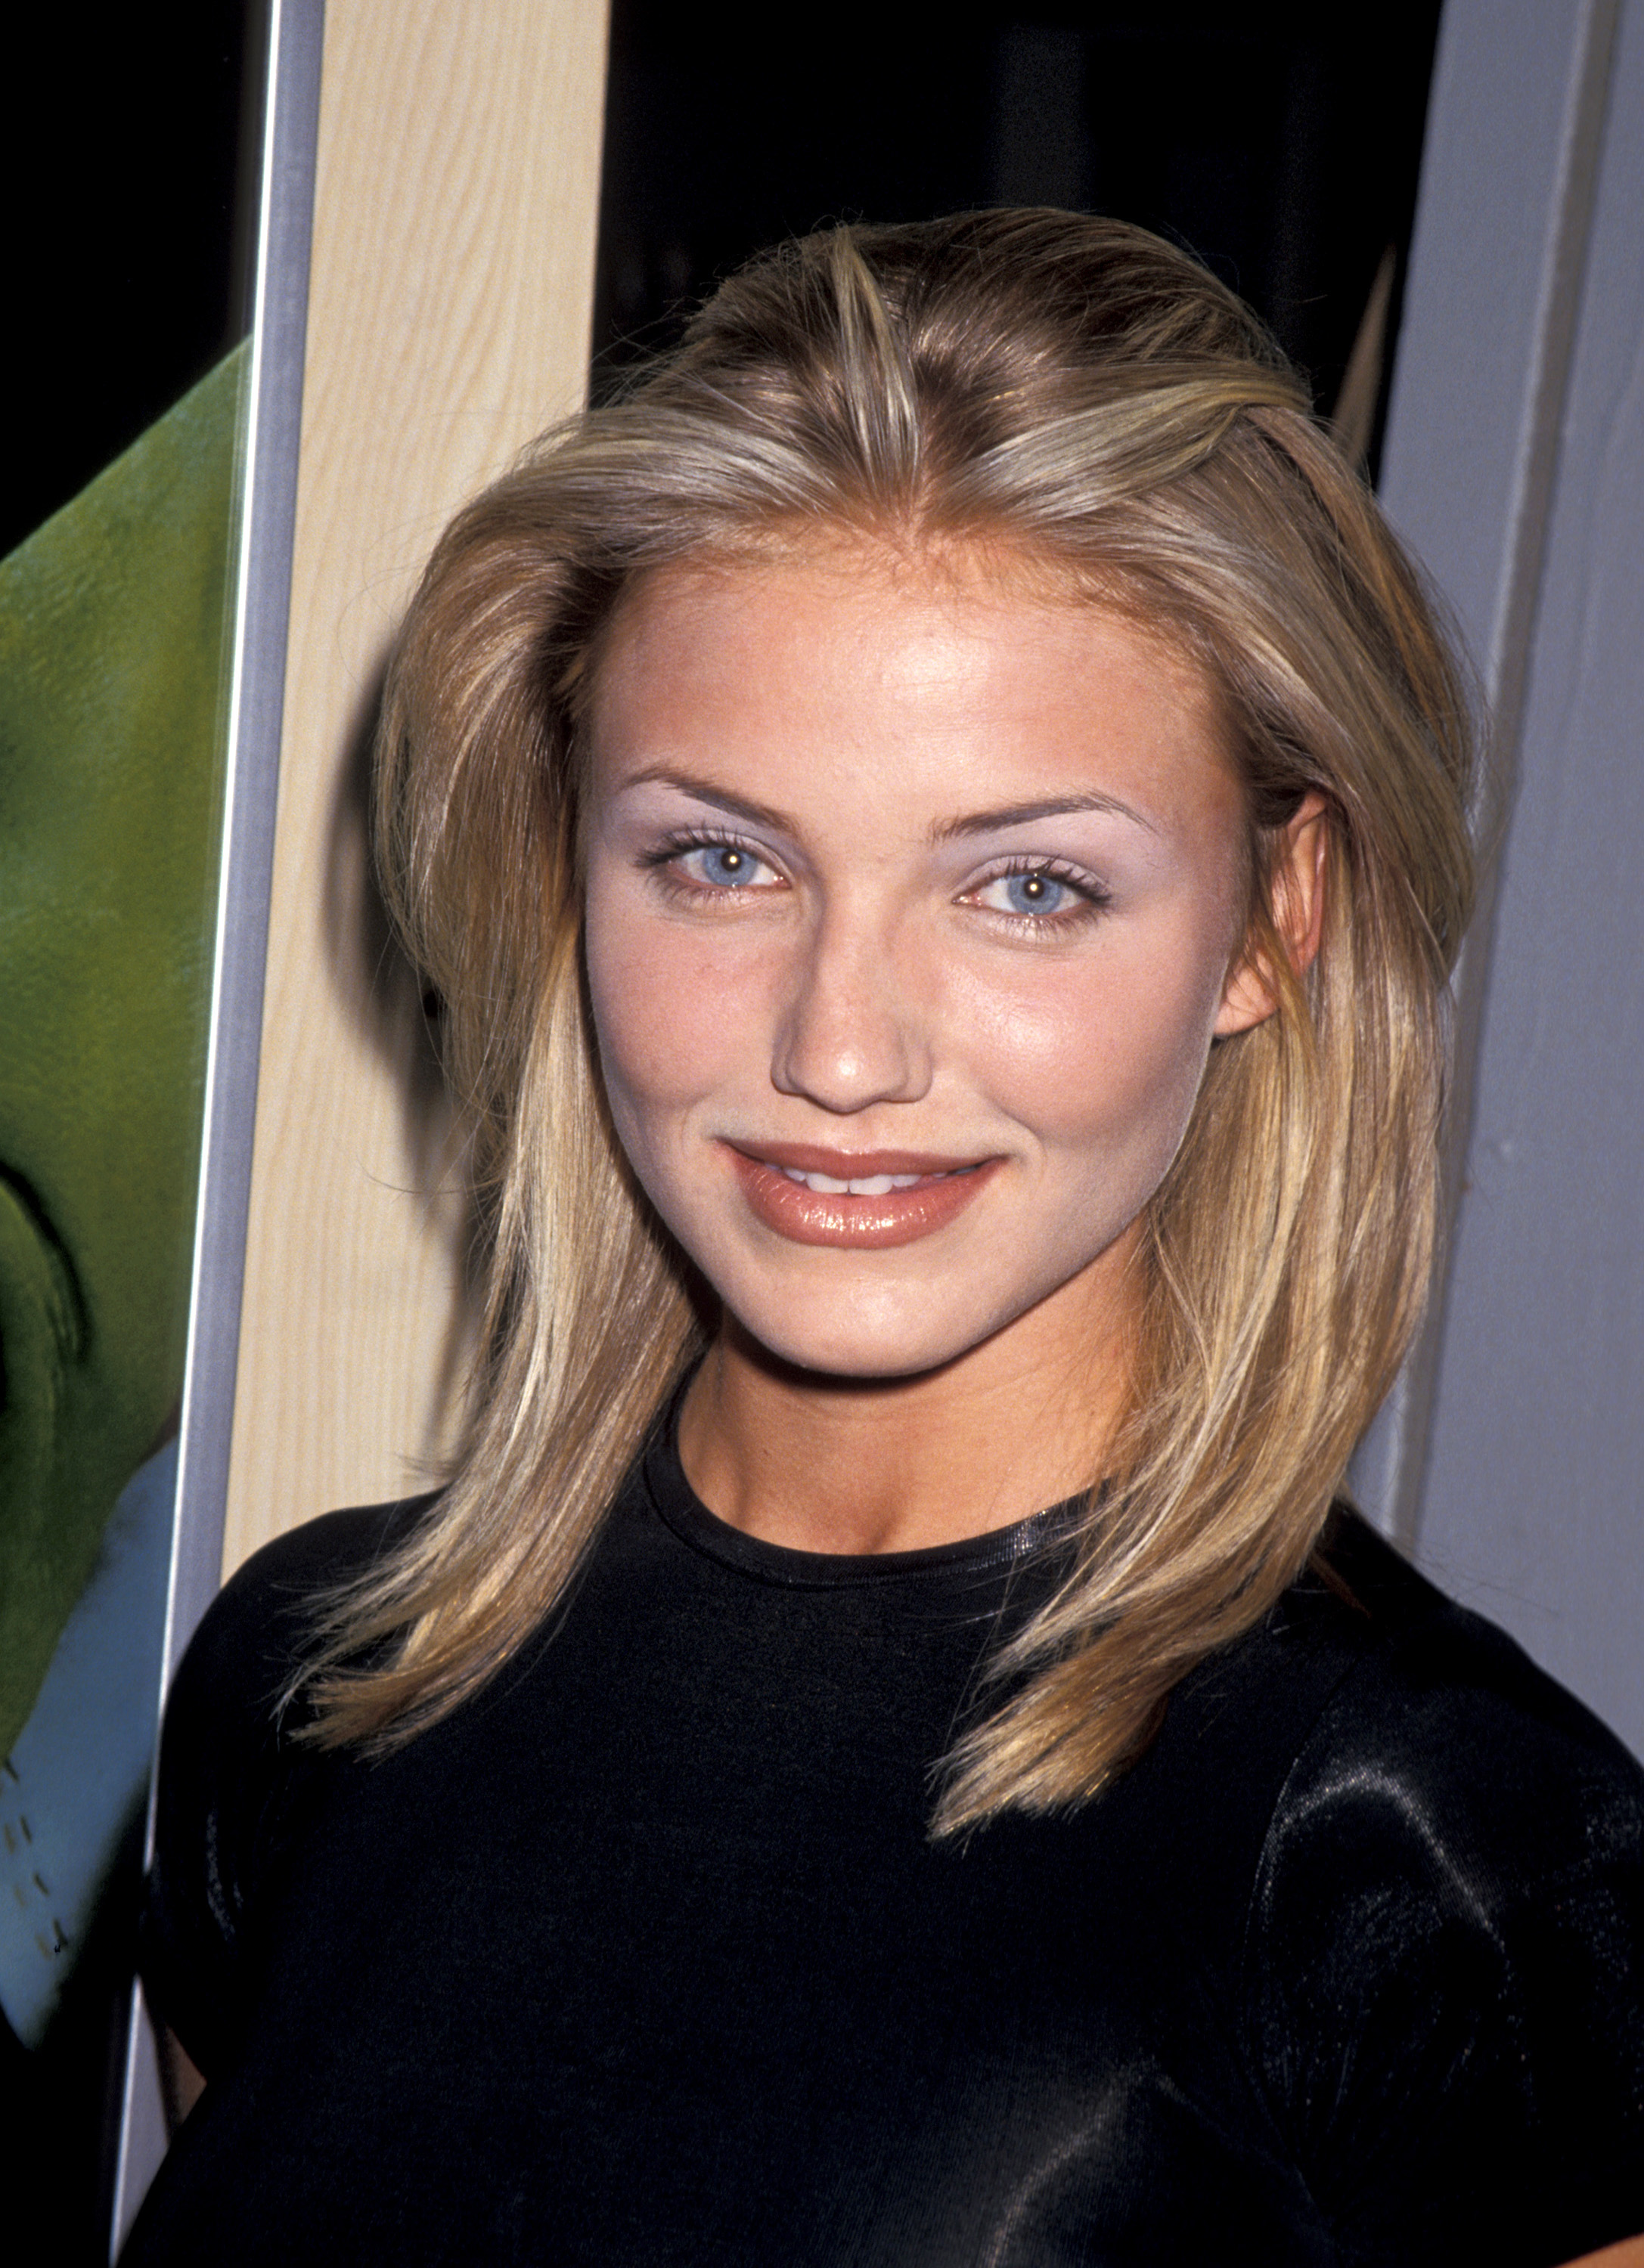 Cameron Diaz at the Video Software Dealers Association Convention on July 25, 1994 | Source: Getty Images